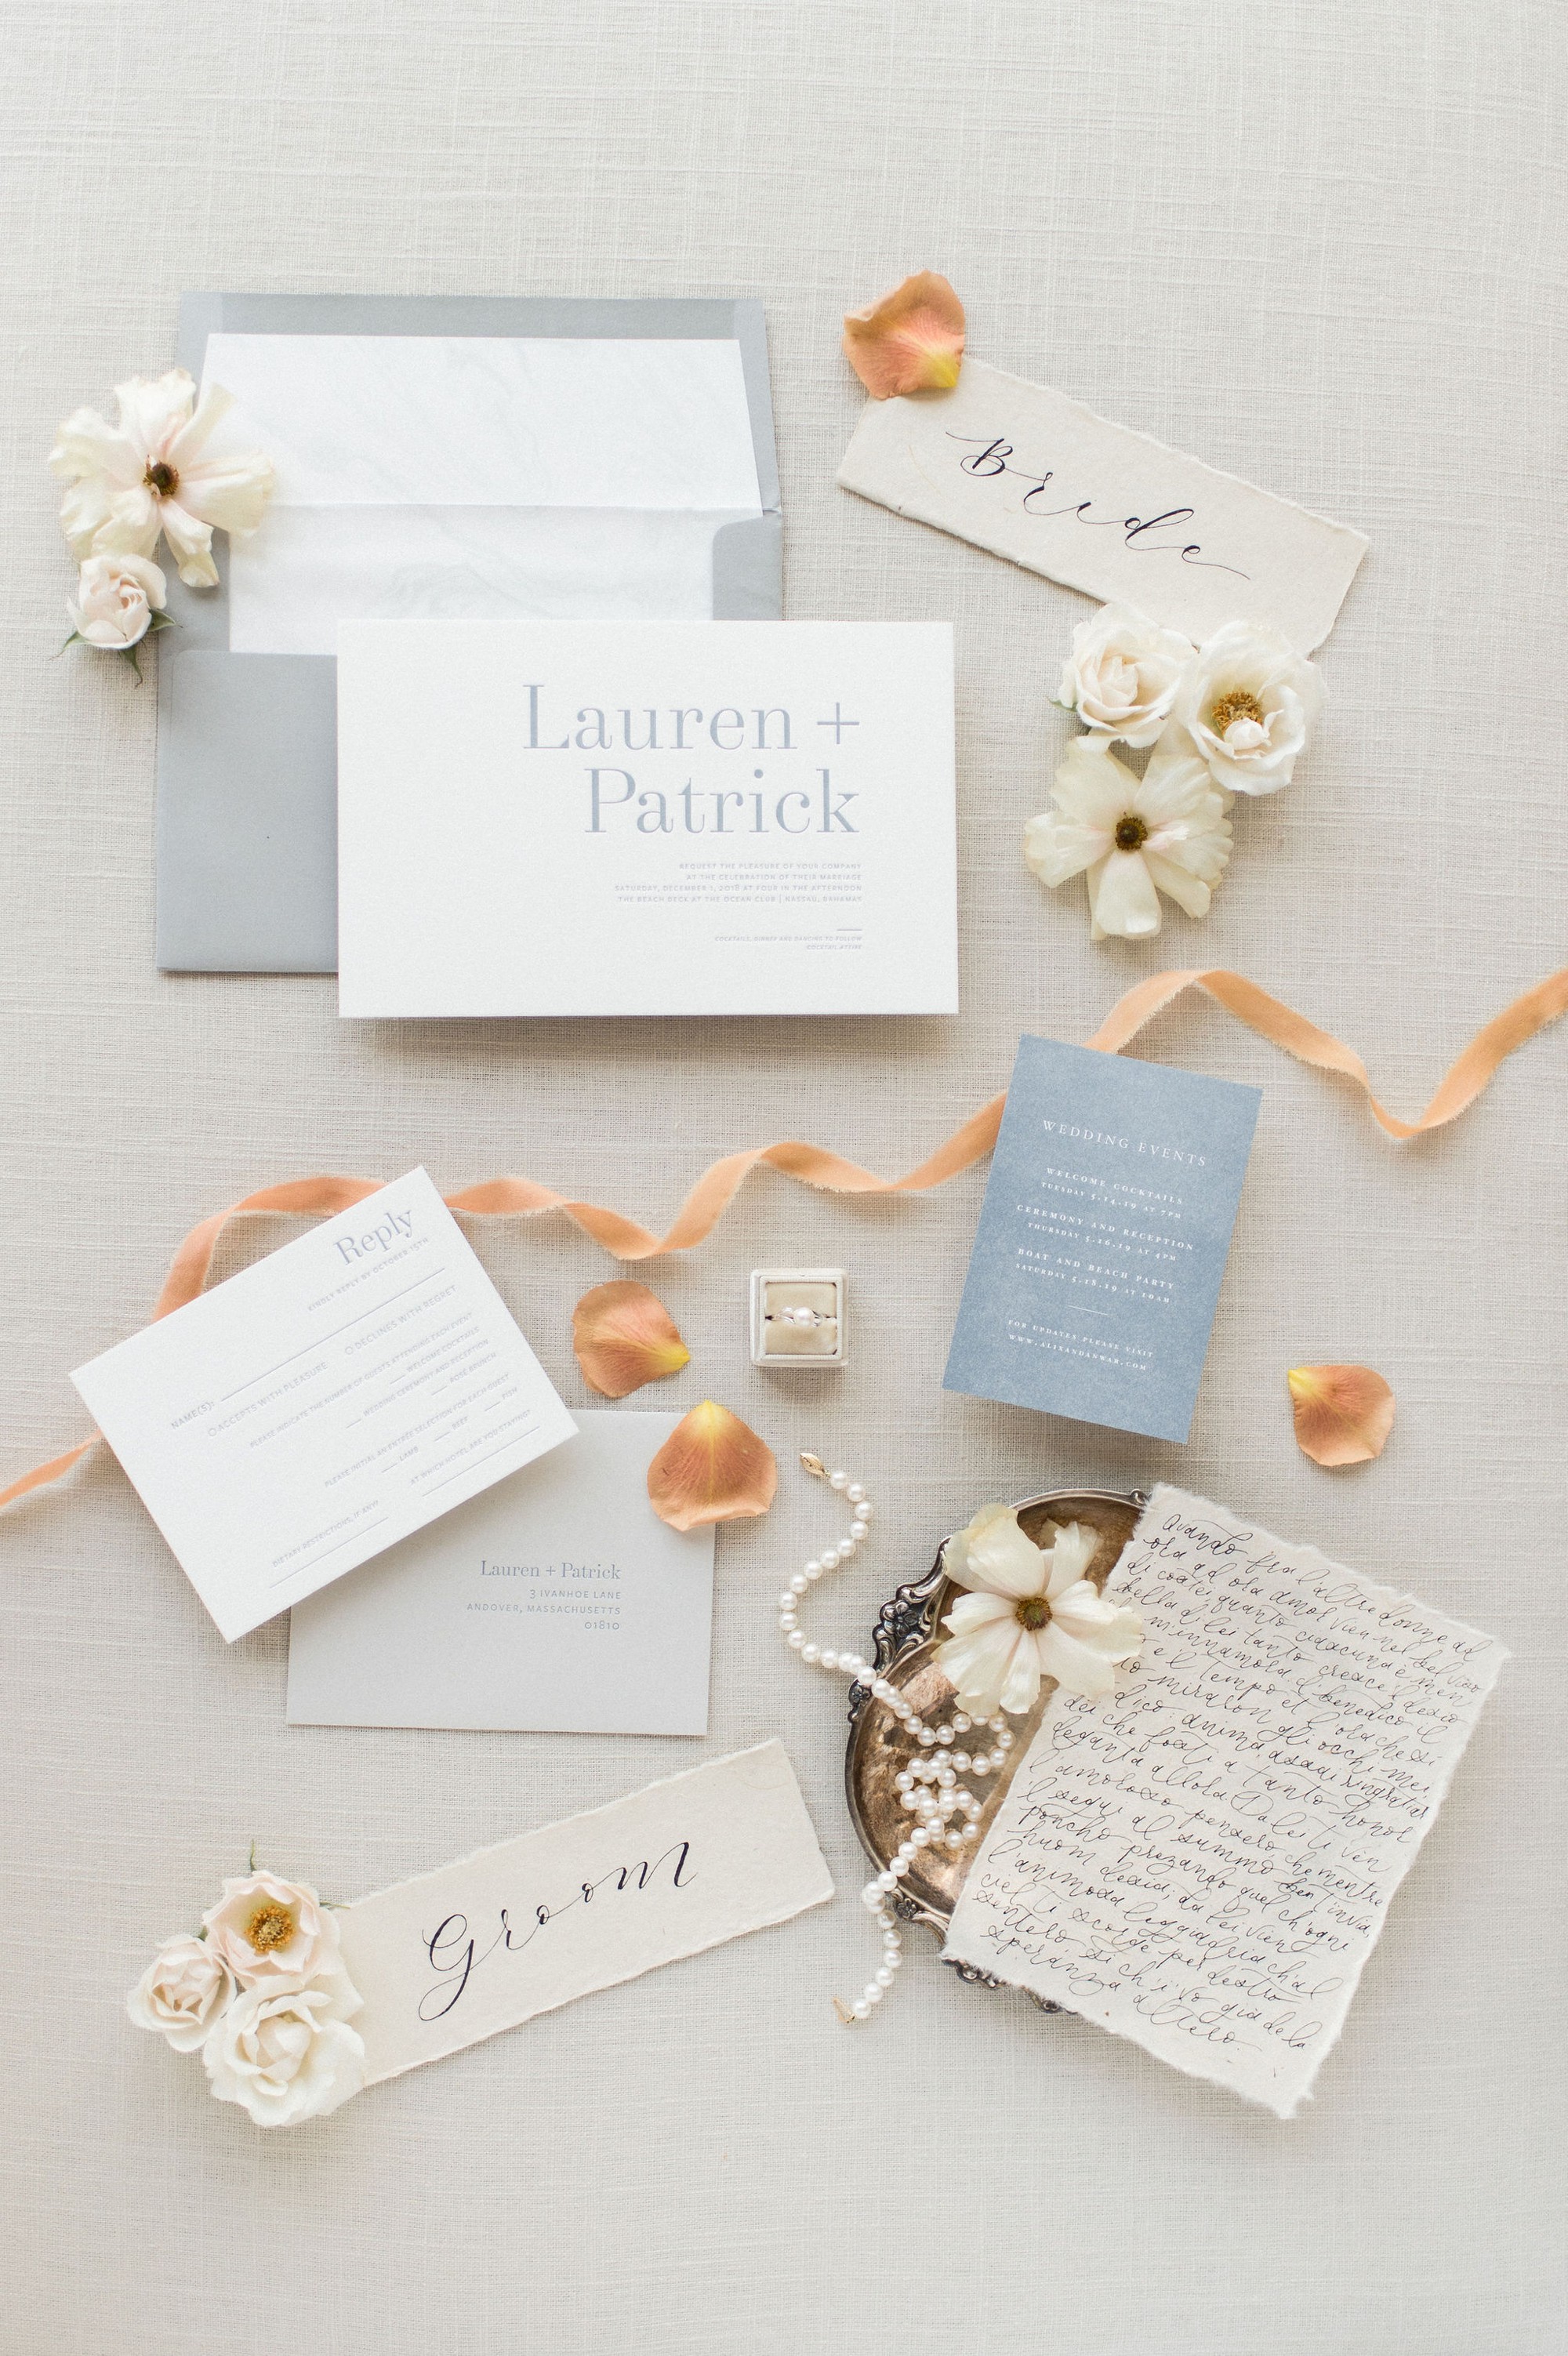 Tuscan meets modern | fete collection modern invitation in gray and white with calligraphy